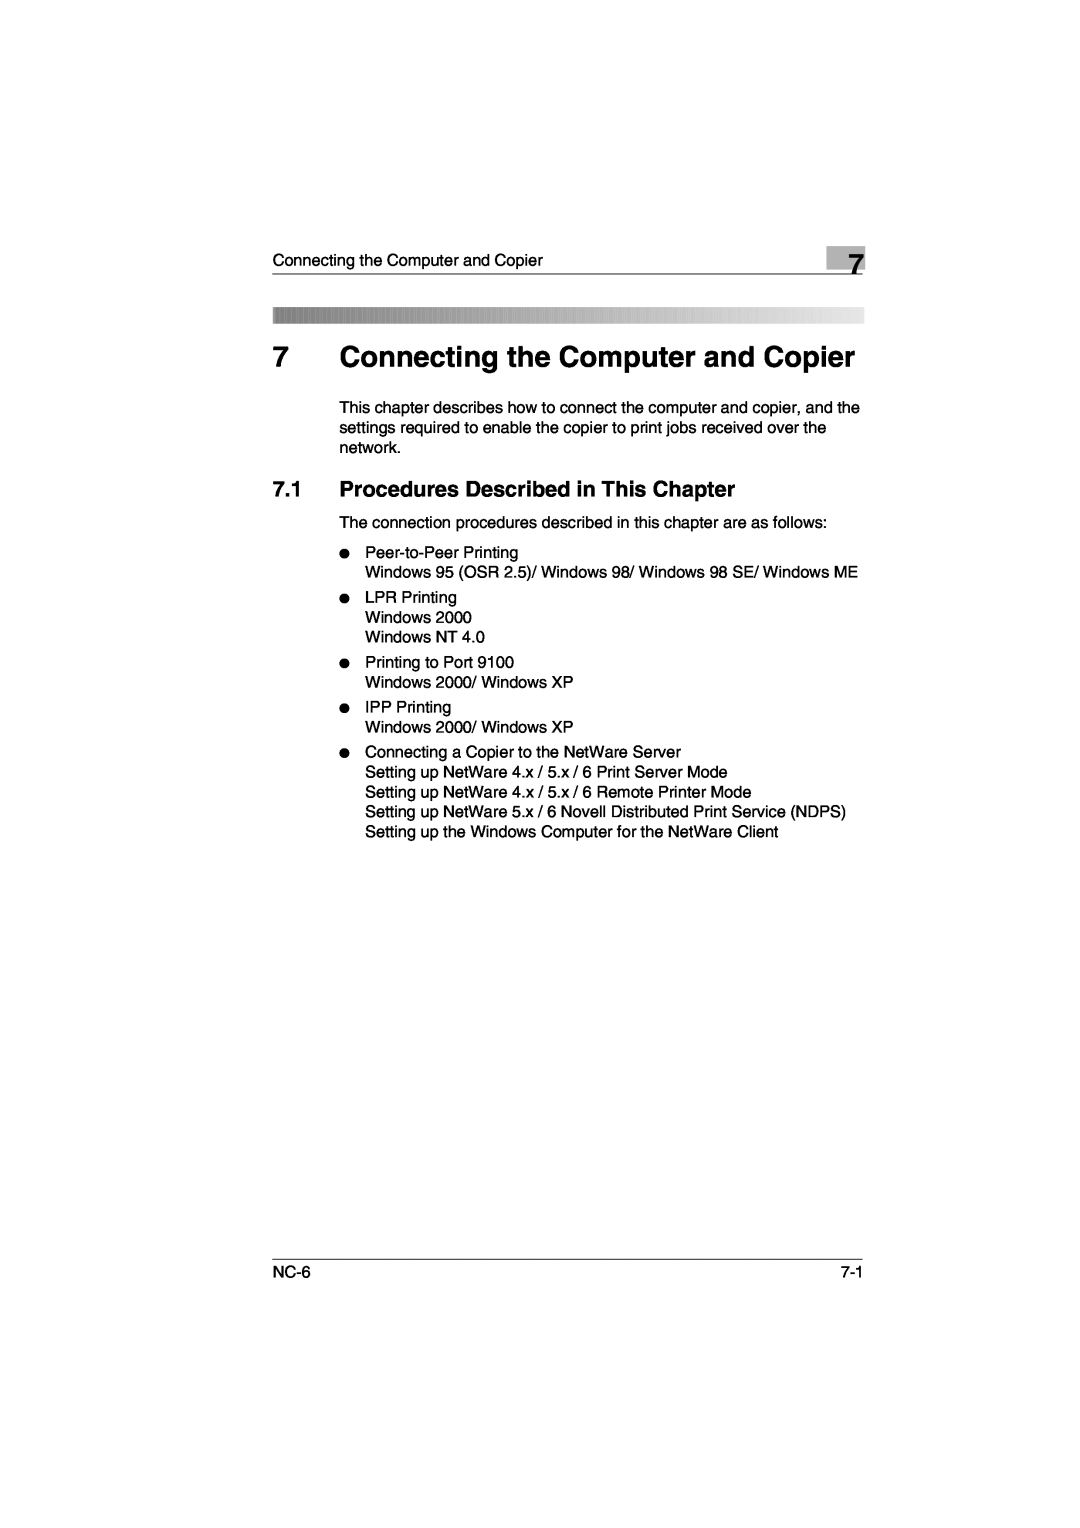 Konica Minolta NC-6 user manual Connecting the Computer and Copier, Procedures Described in This Chapter 